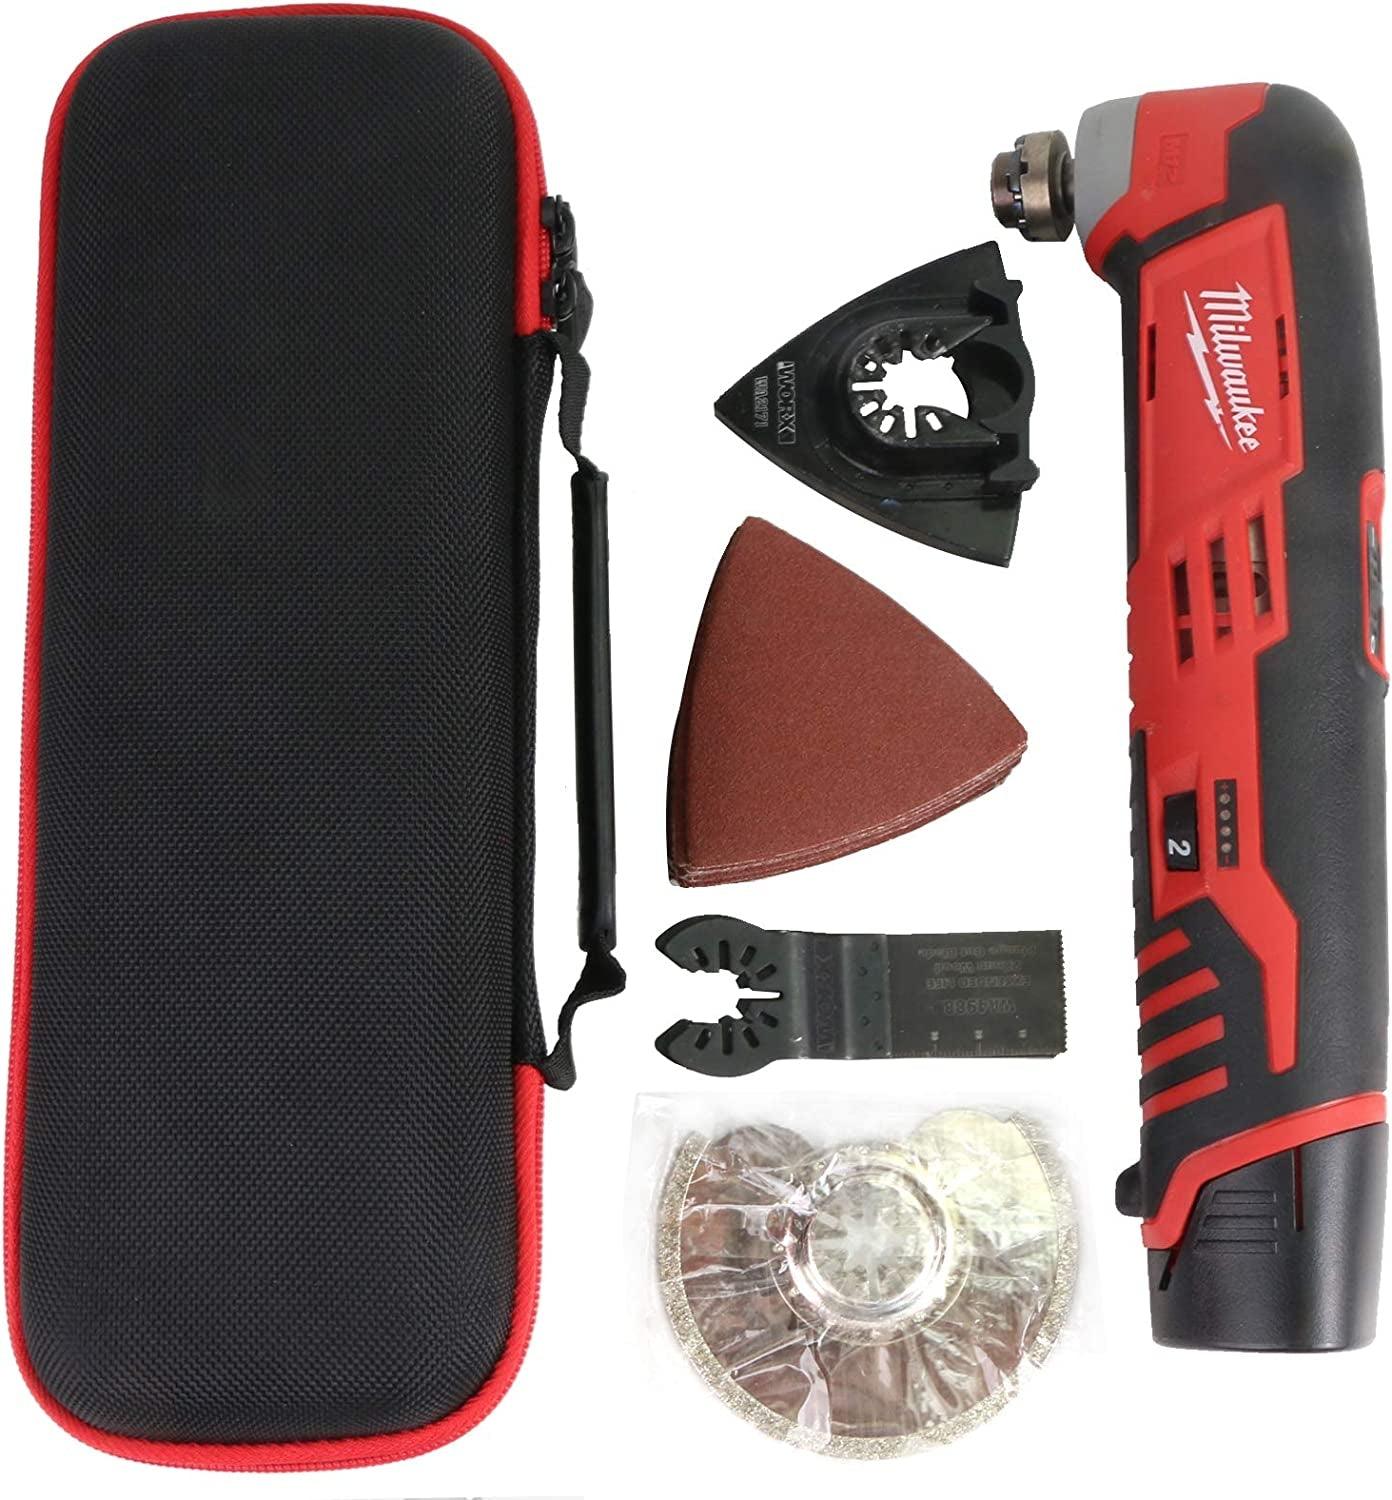 Hard Carrying Case Compatible with Milwaukee 2426-20 M12 12 Volt Cordless Multi Tool